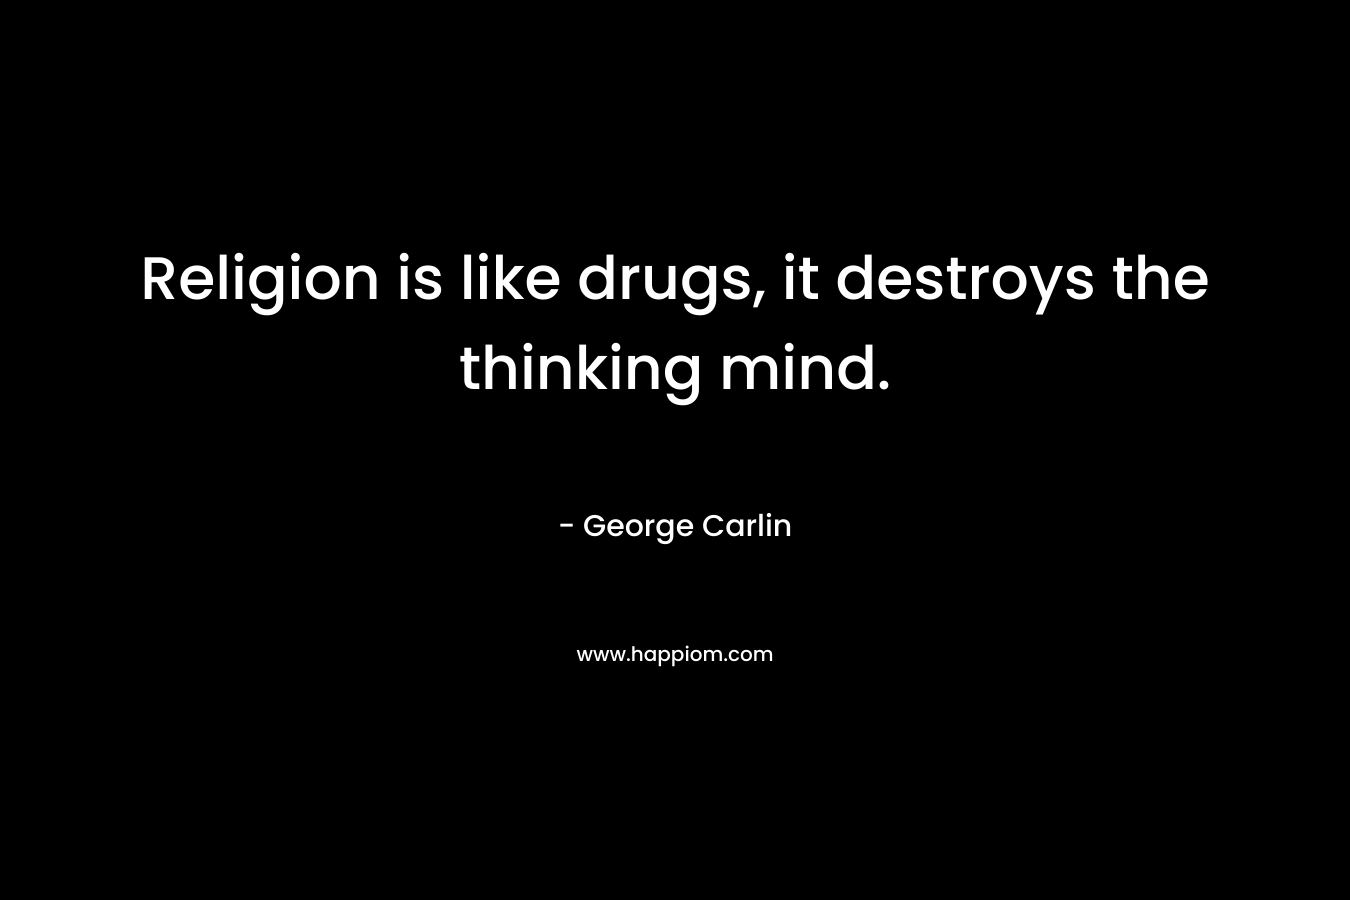 Religion is like drugs, it destroys the thinking mind.